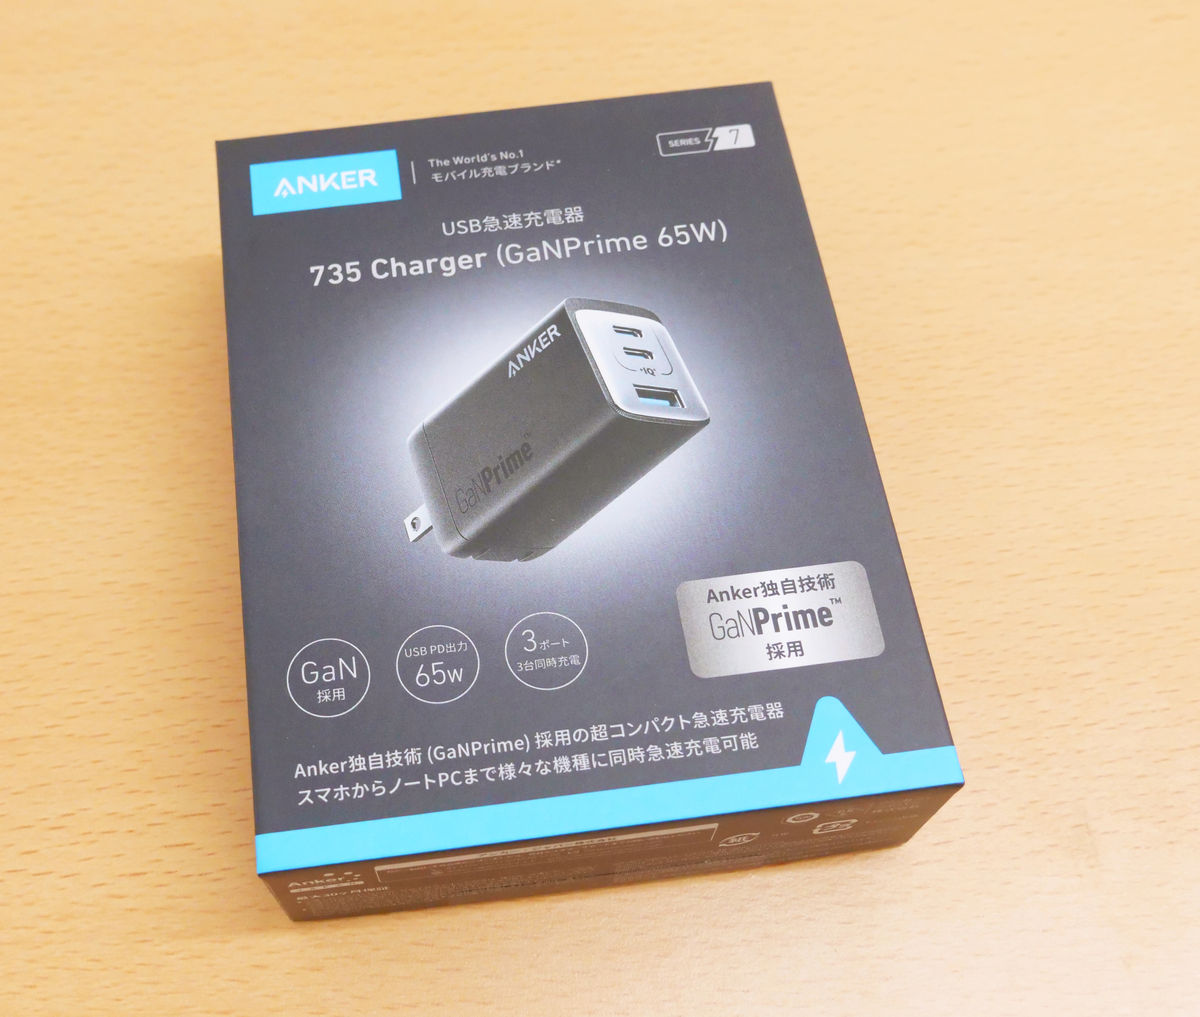 The 3-port charger 'Anker 735 Charger' with a maximum output of 65